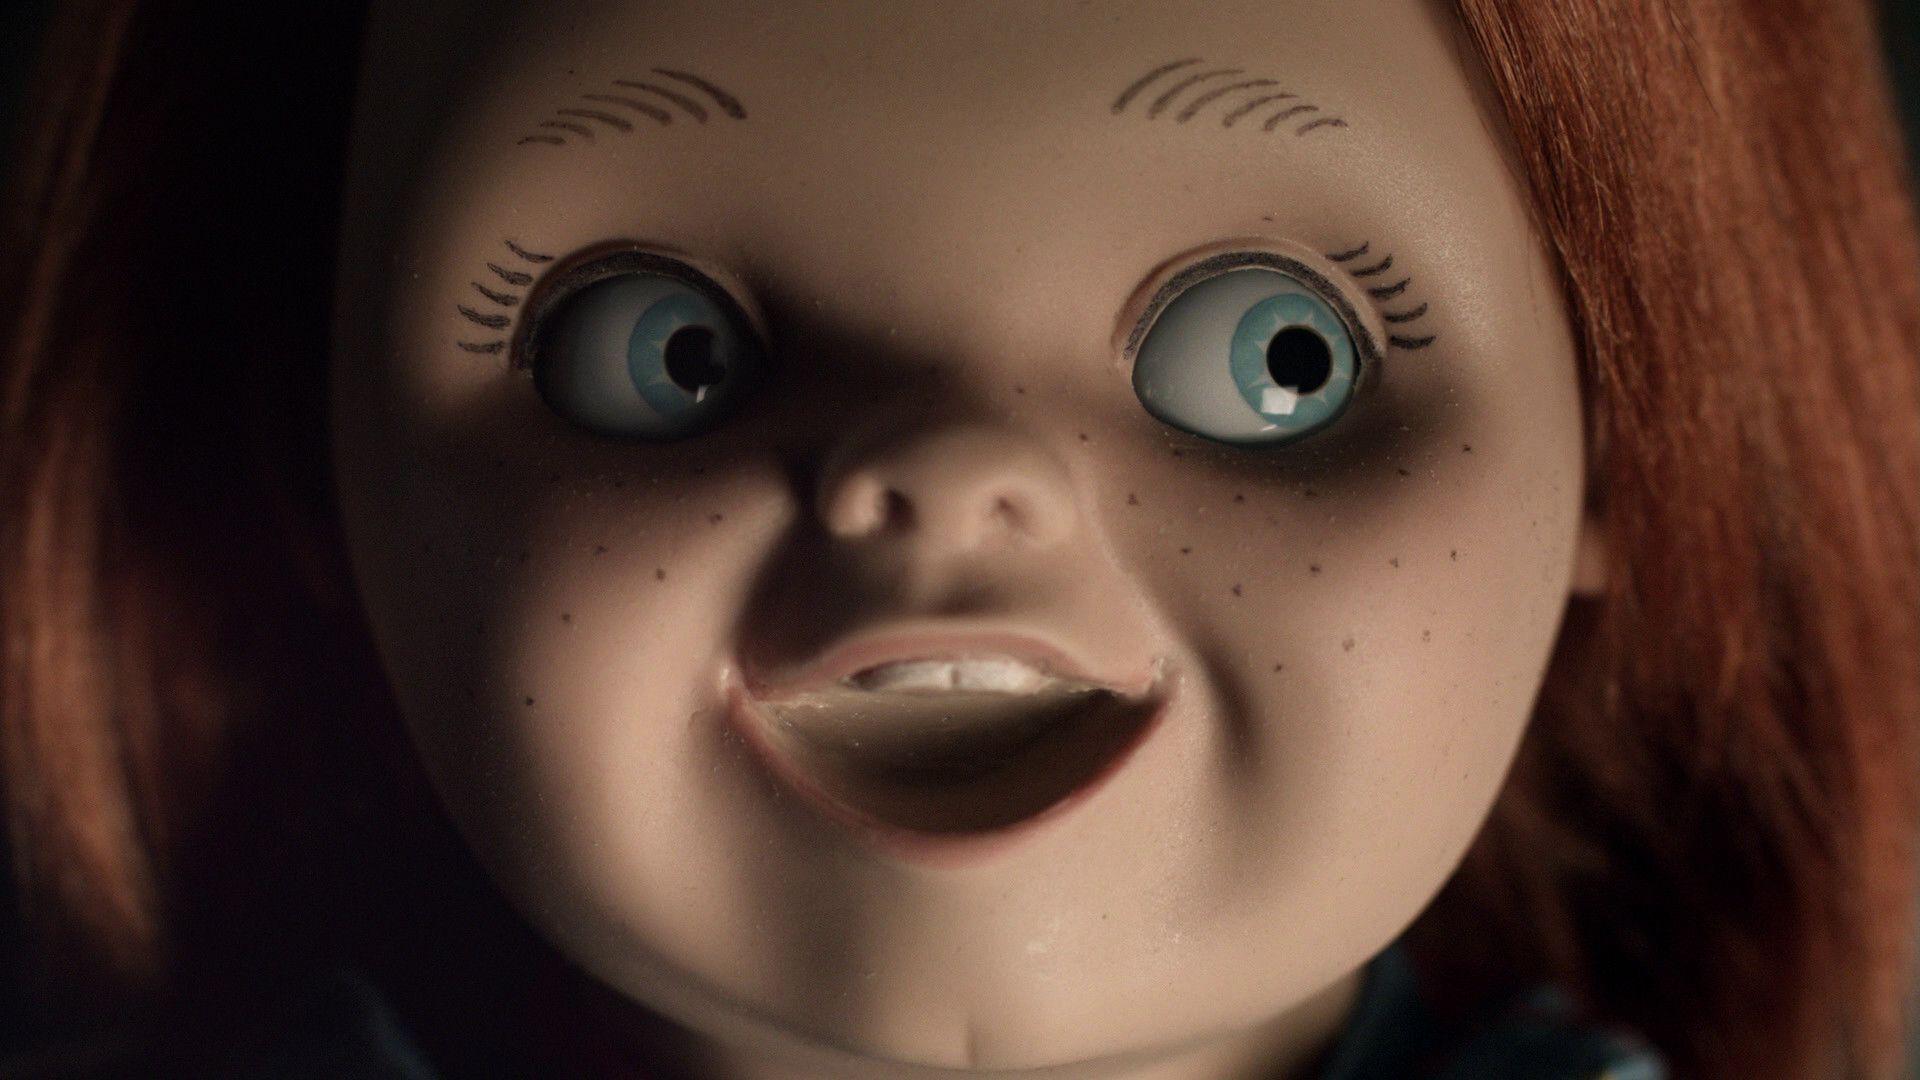 image of Chucky Doll Wallpaper - #SpaceHero